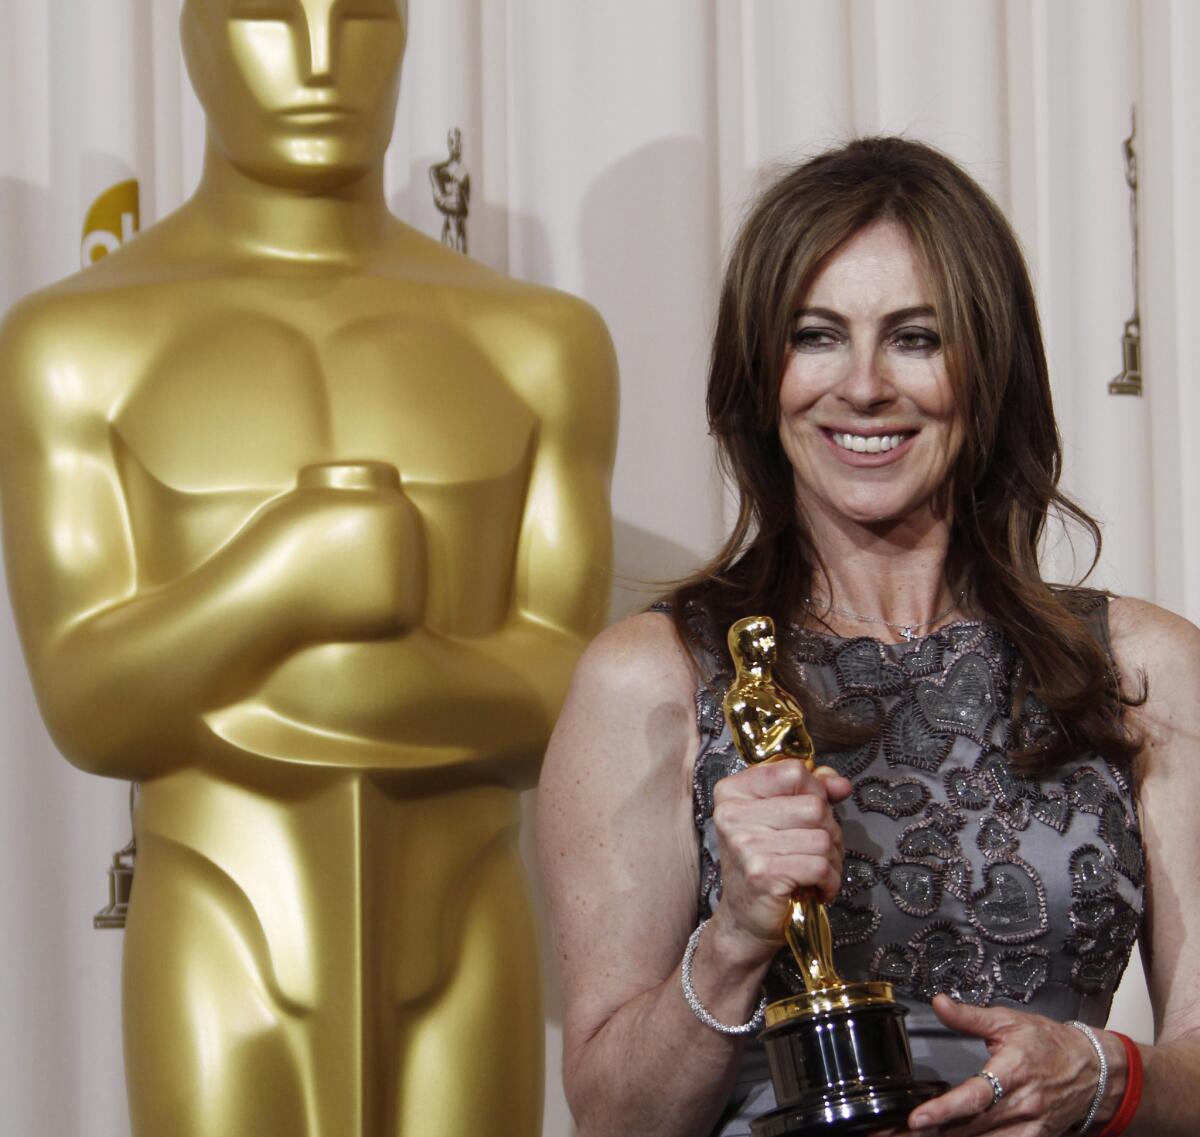 Kathryn Bigelow remains the only woman to win the Oscar for directing. A 2017 study revealed that just 7% of 2016's top 250 films were directed by women.